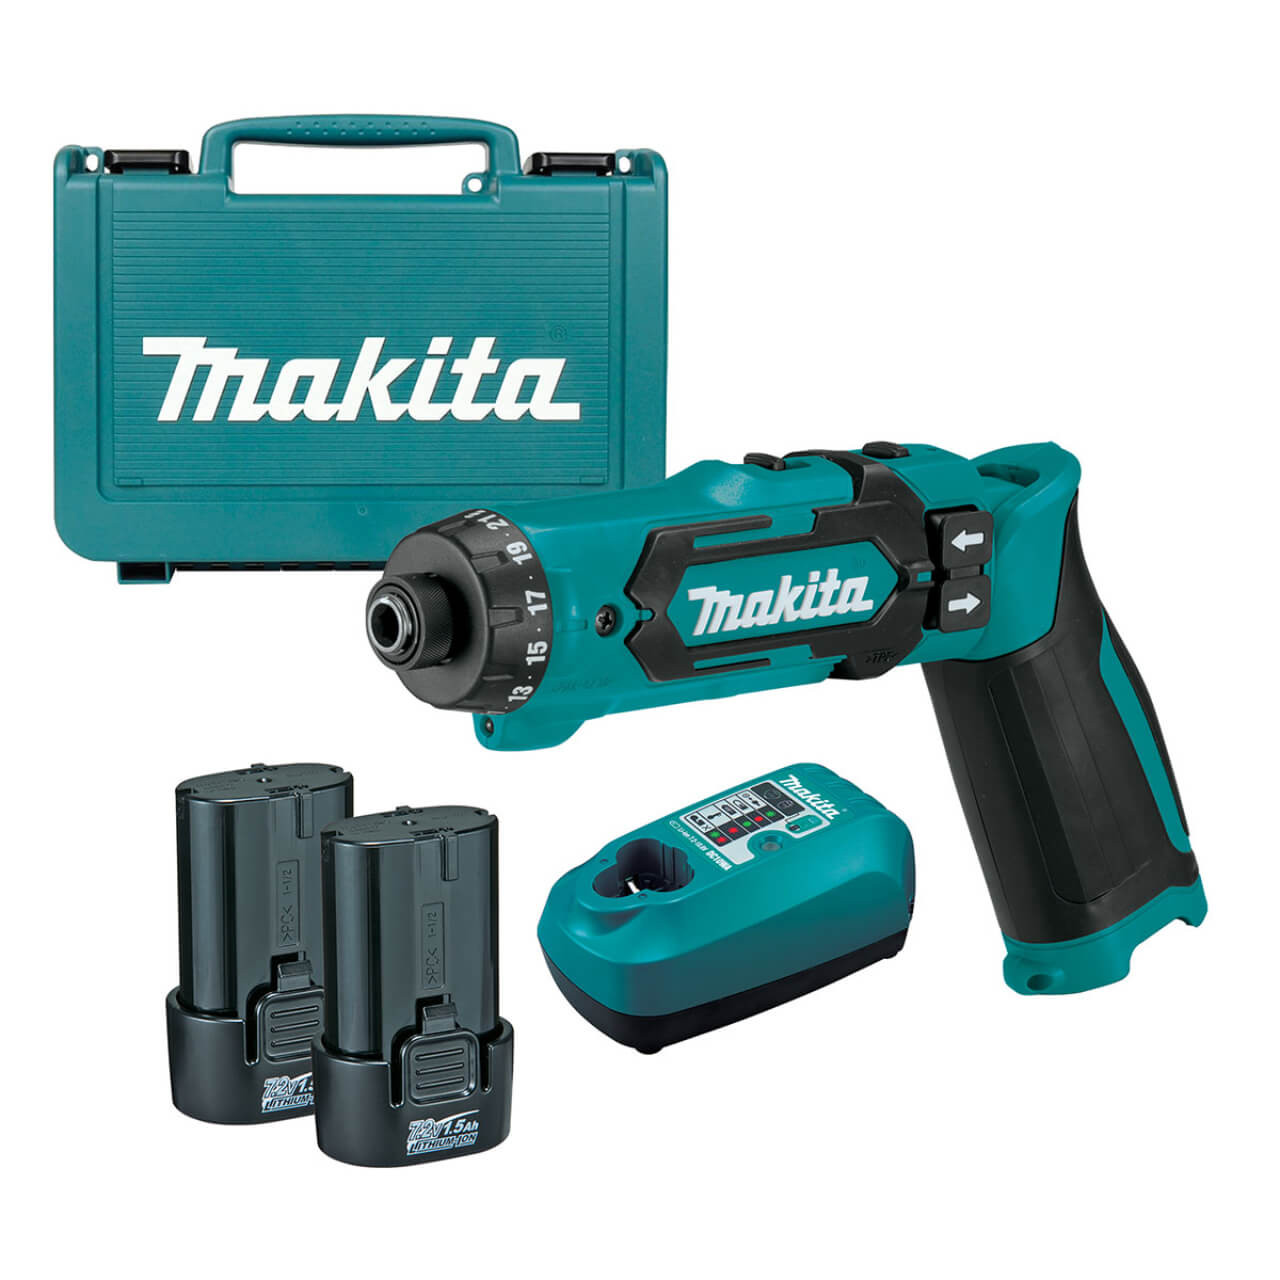 Makita 7.2V Pen Driver Drill Kit - Includes 2 x 1.5Ah Batteries. Charger & Carry Bag